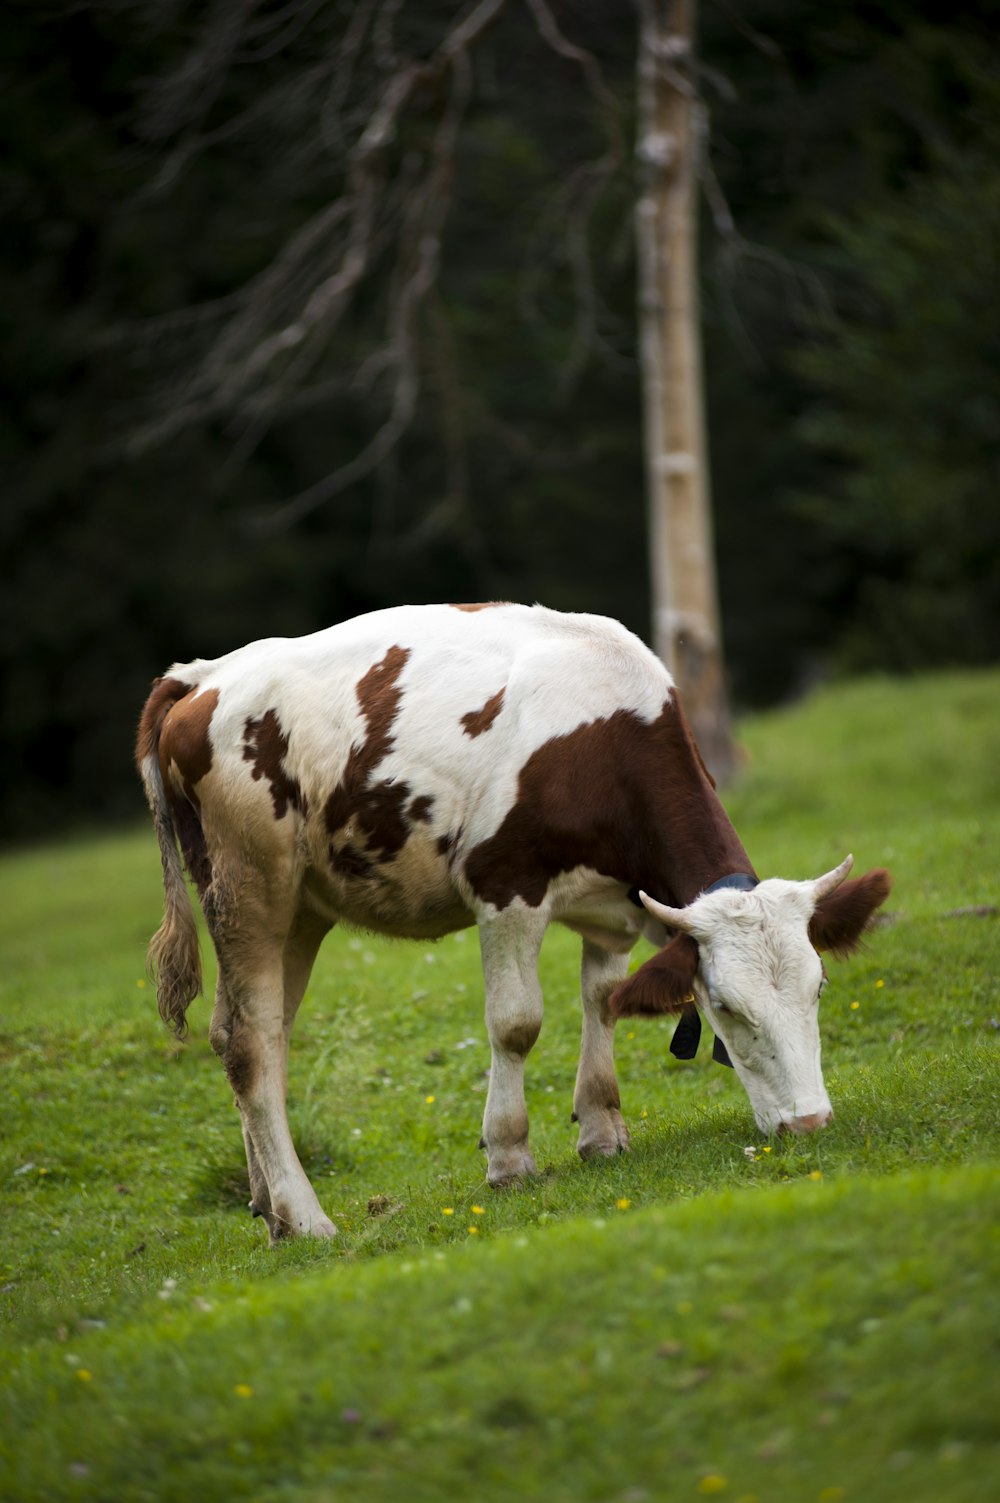 white and brown cow on grass field